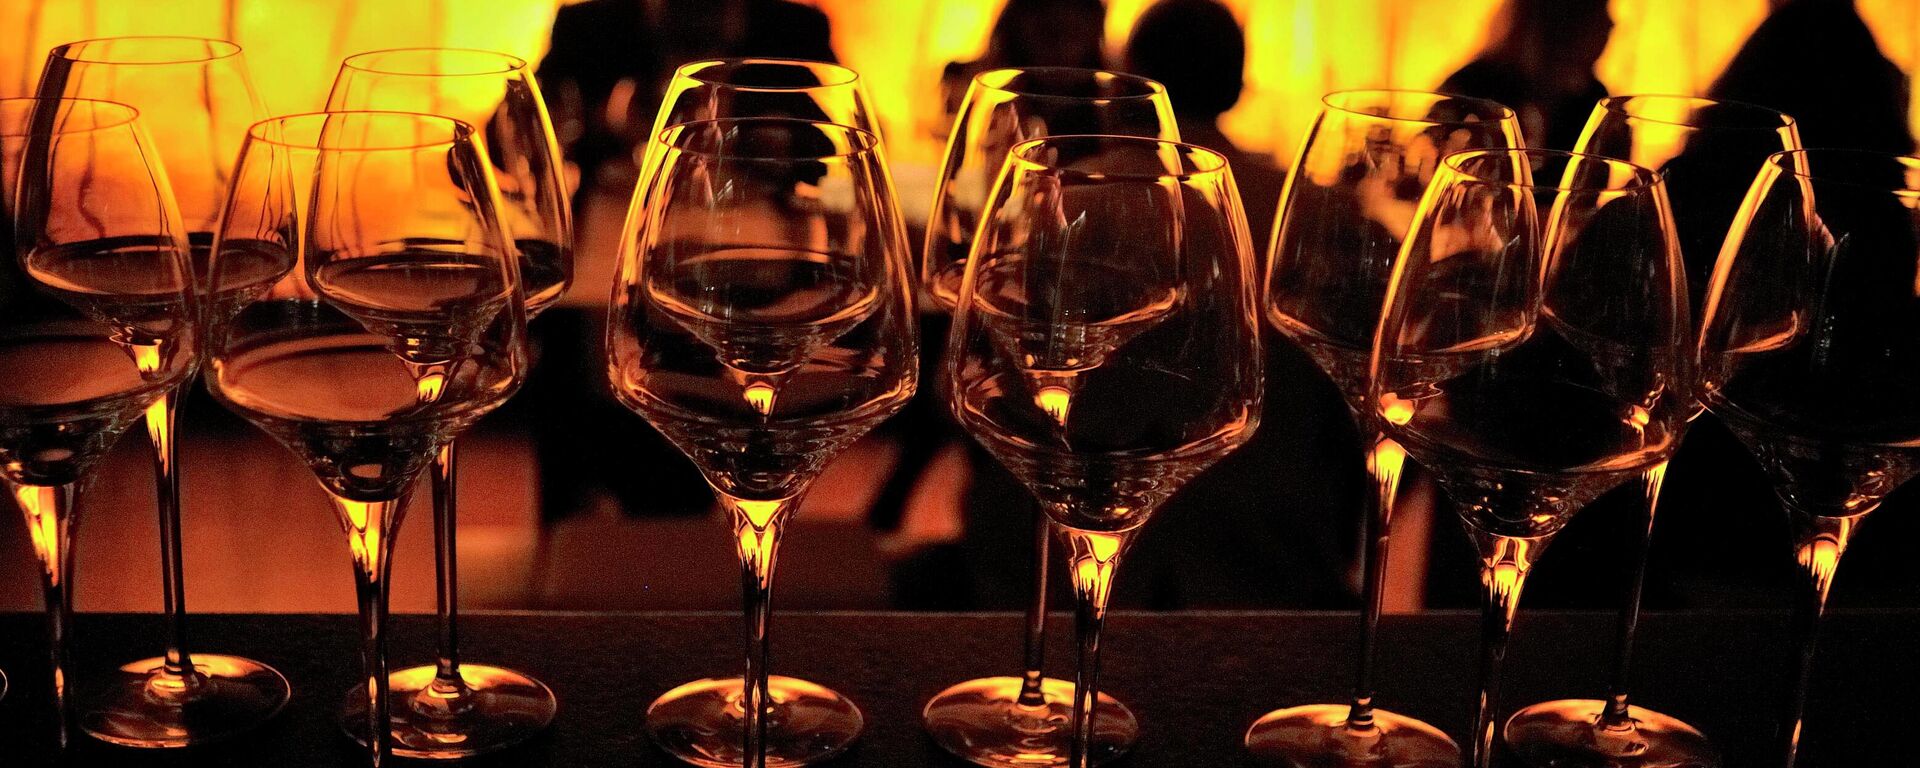 In this Sunday, Jan. 16, 2011 photo, wine glasses stand in the foreground of a group learning wine appreciation and fine dining, being conducted by Tulleeho Beverage Innovations at a restaurant in New Delhi, India. - Sputnik International, 1920, 17.10.2022